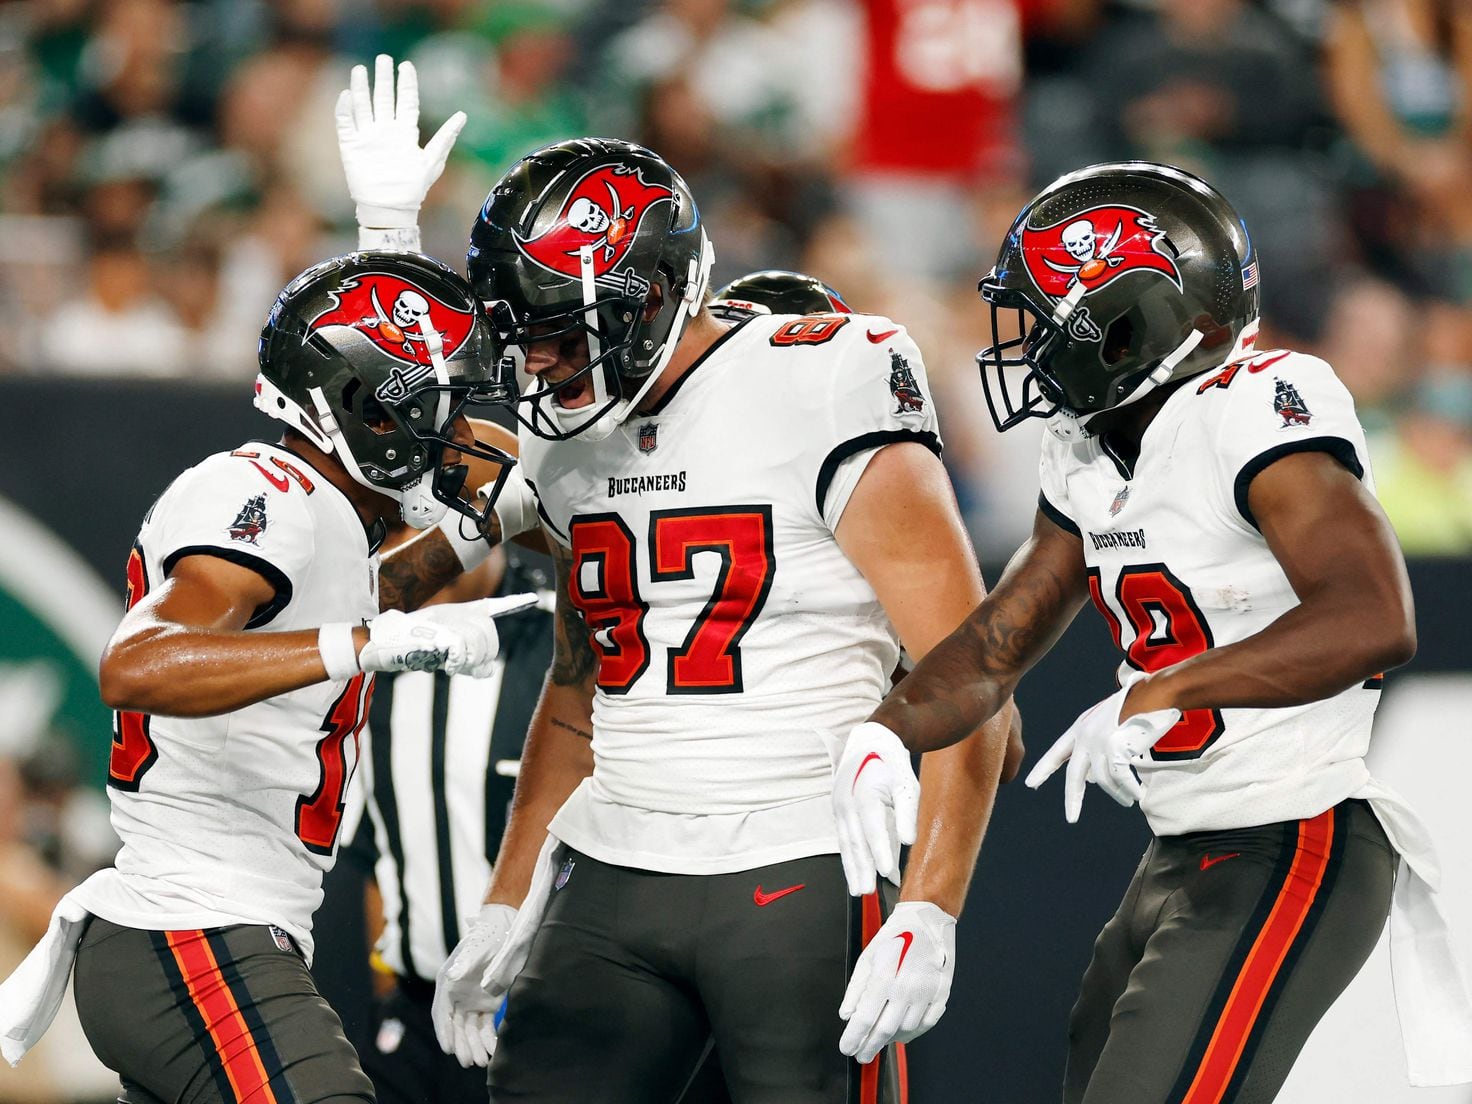 Tampa Bay Buccaneers 13 vs 6 New York Jets summary, stats, and highlights